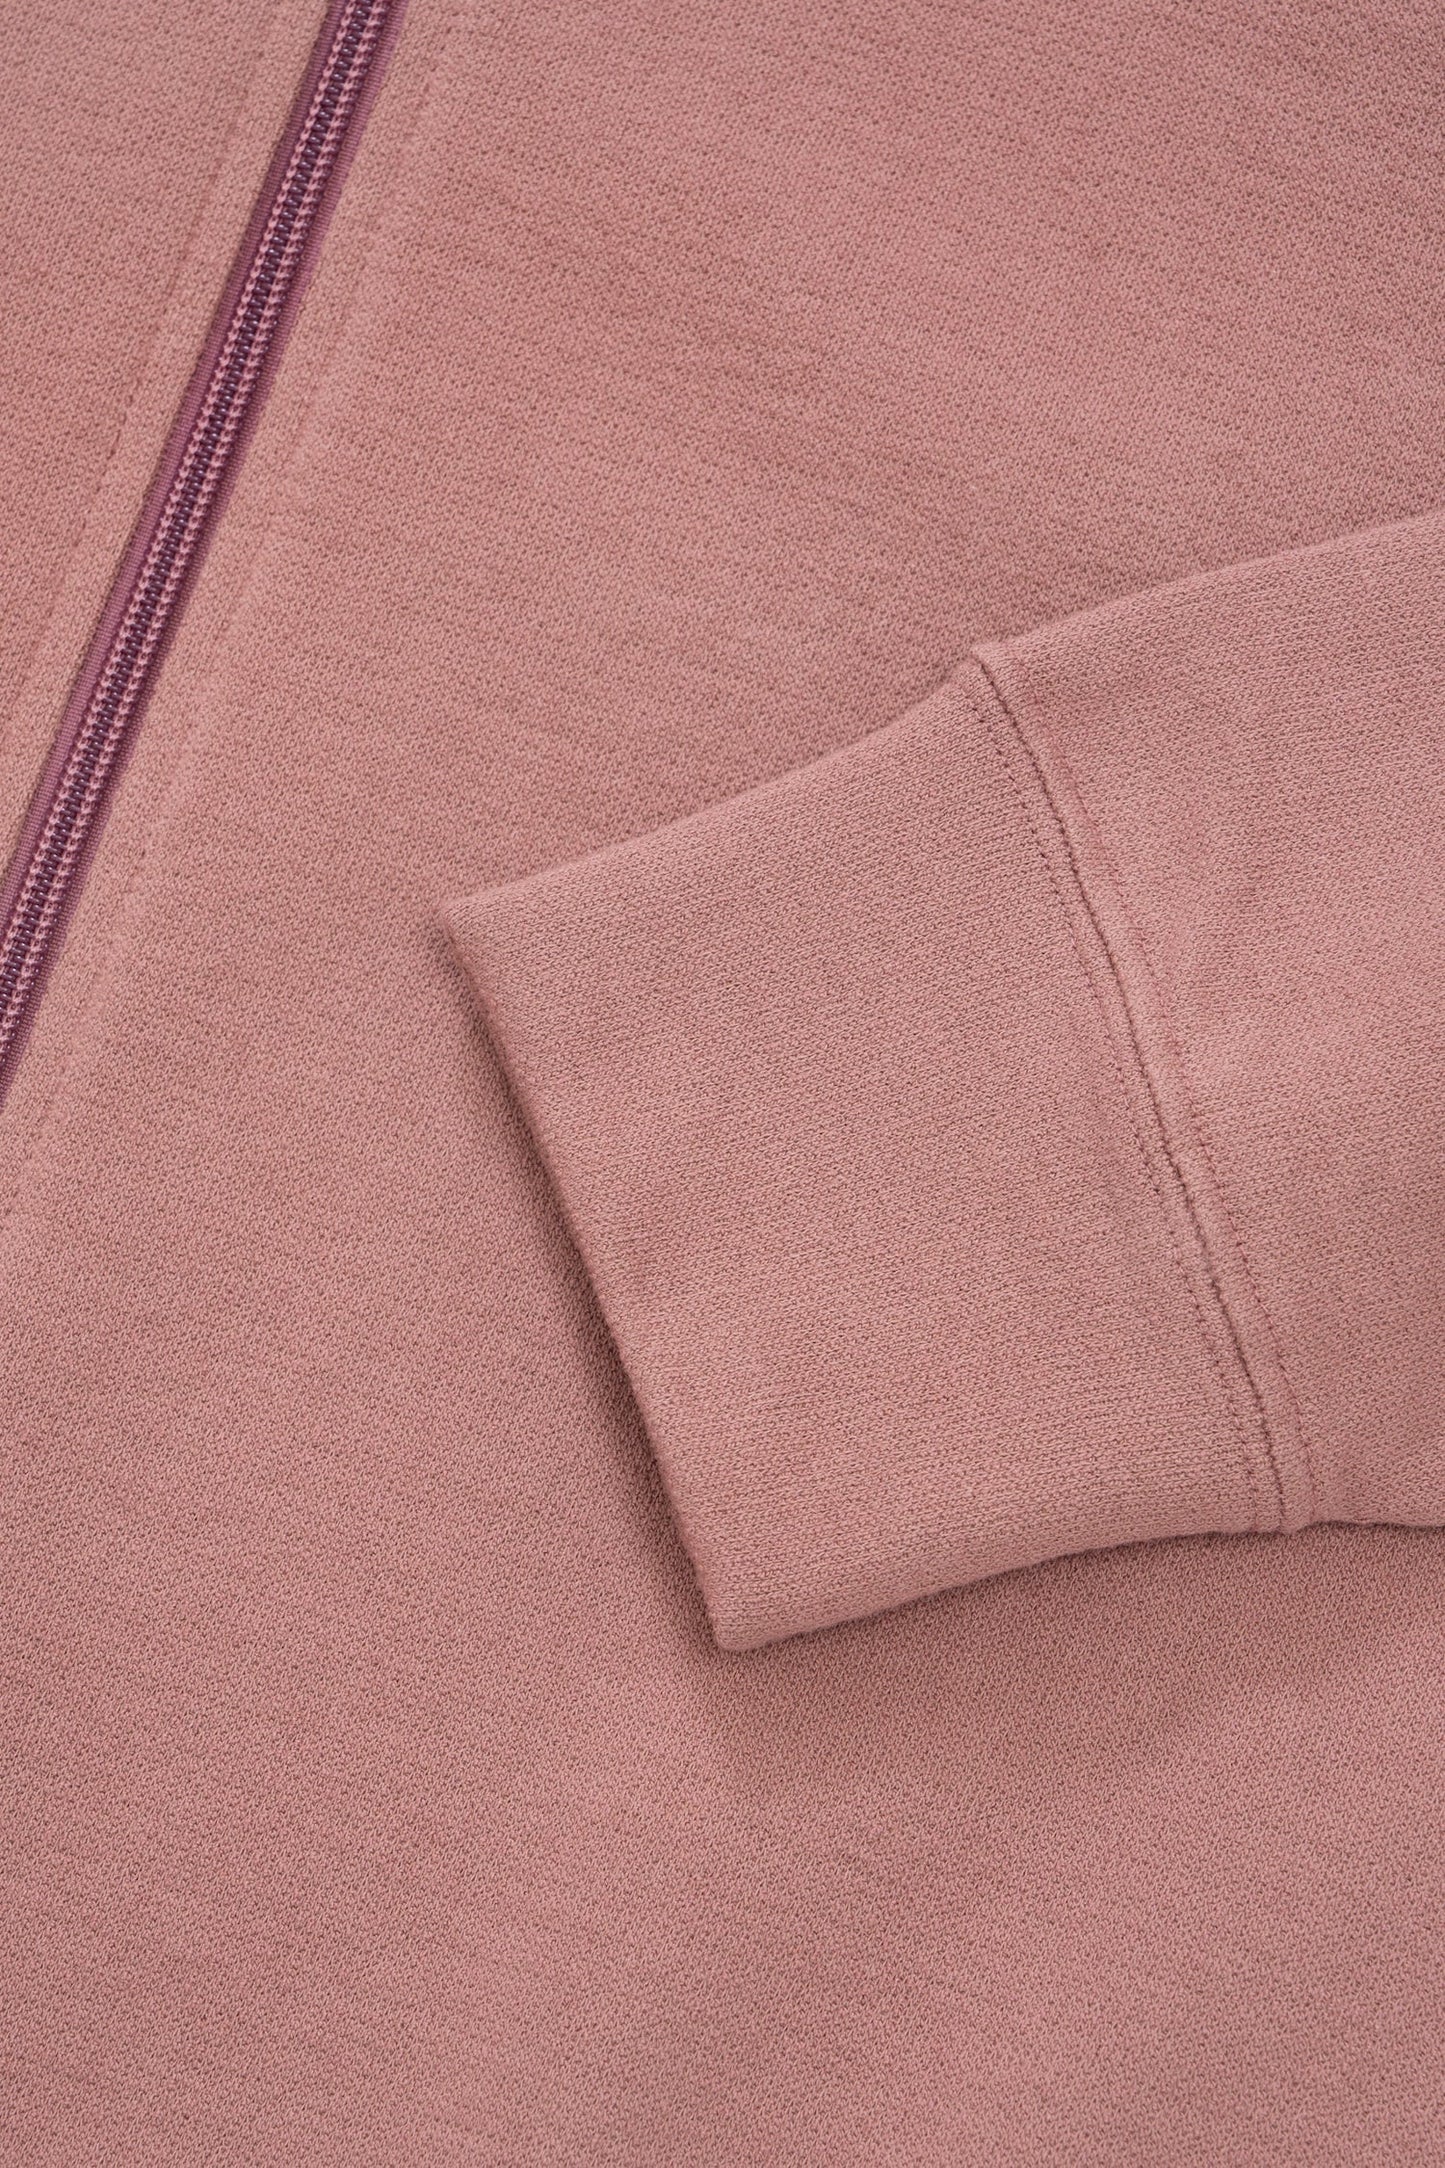 LADY WHITE CO. TEXTURED FULL ZIP - DEEP MAUVE